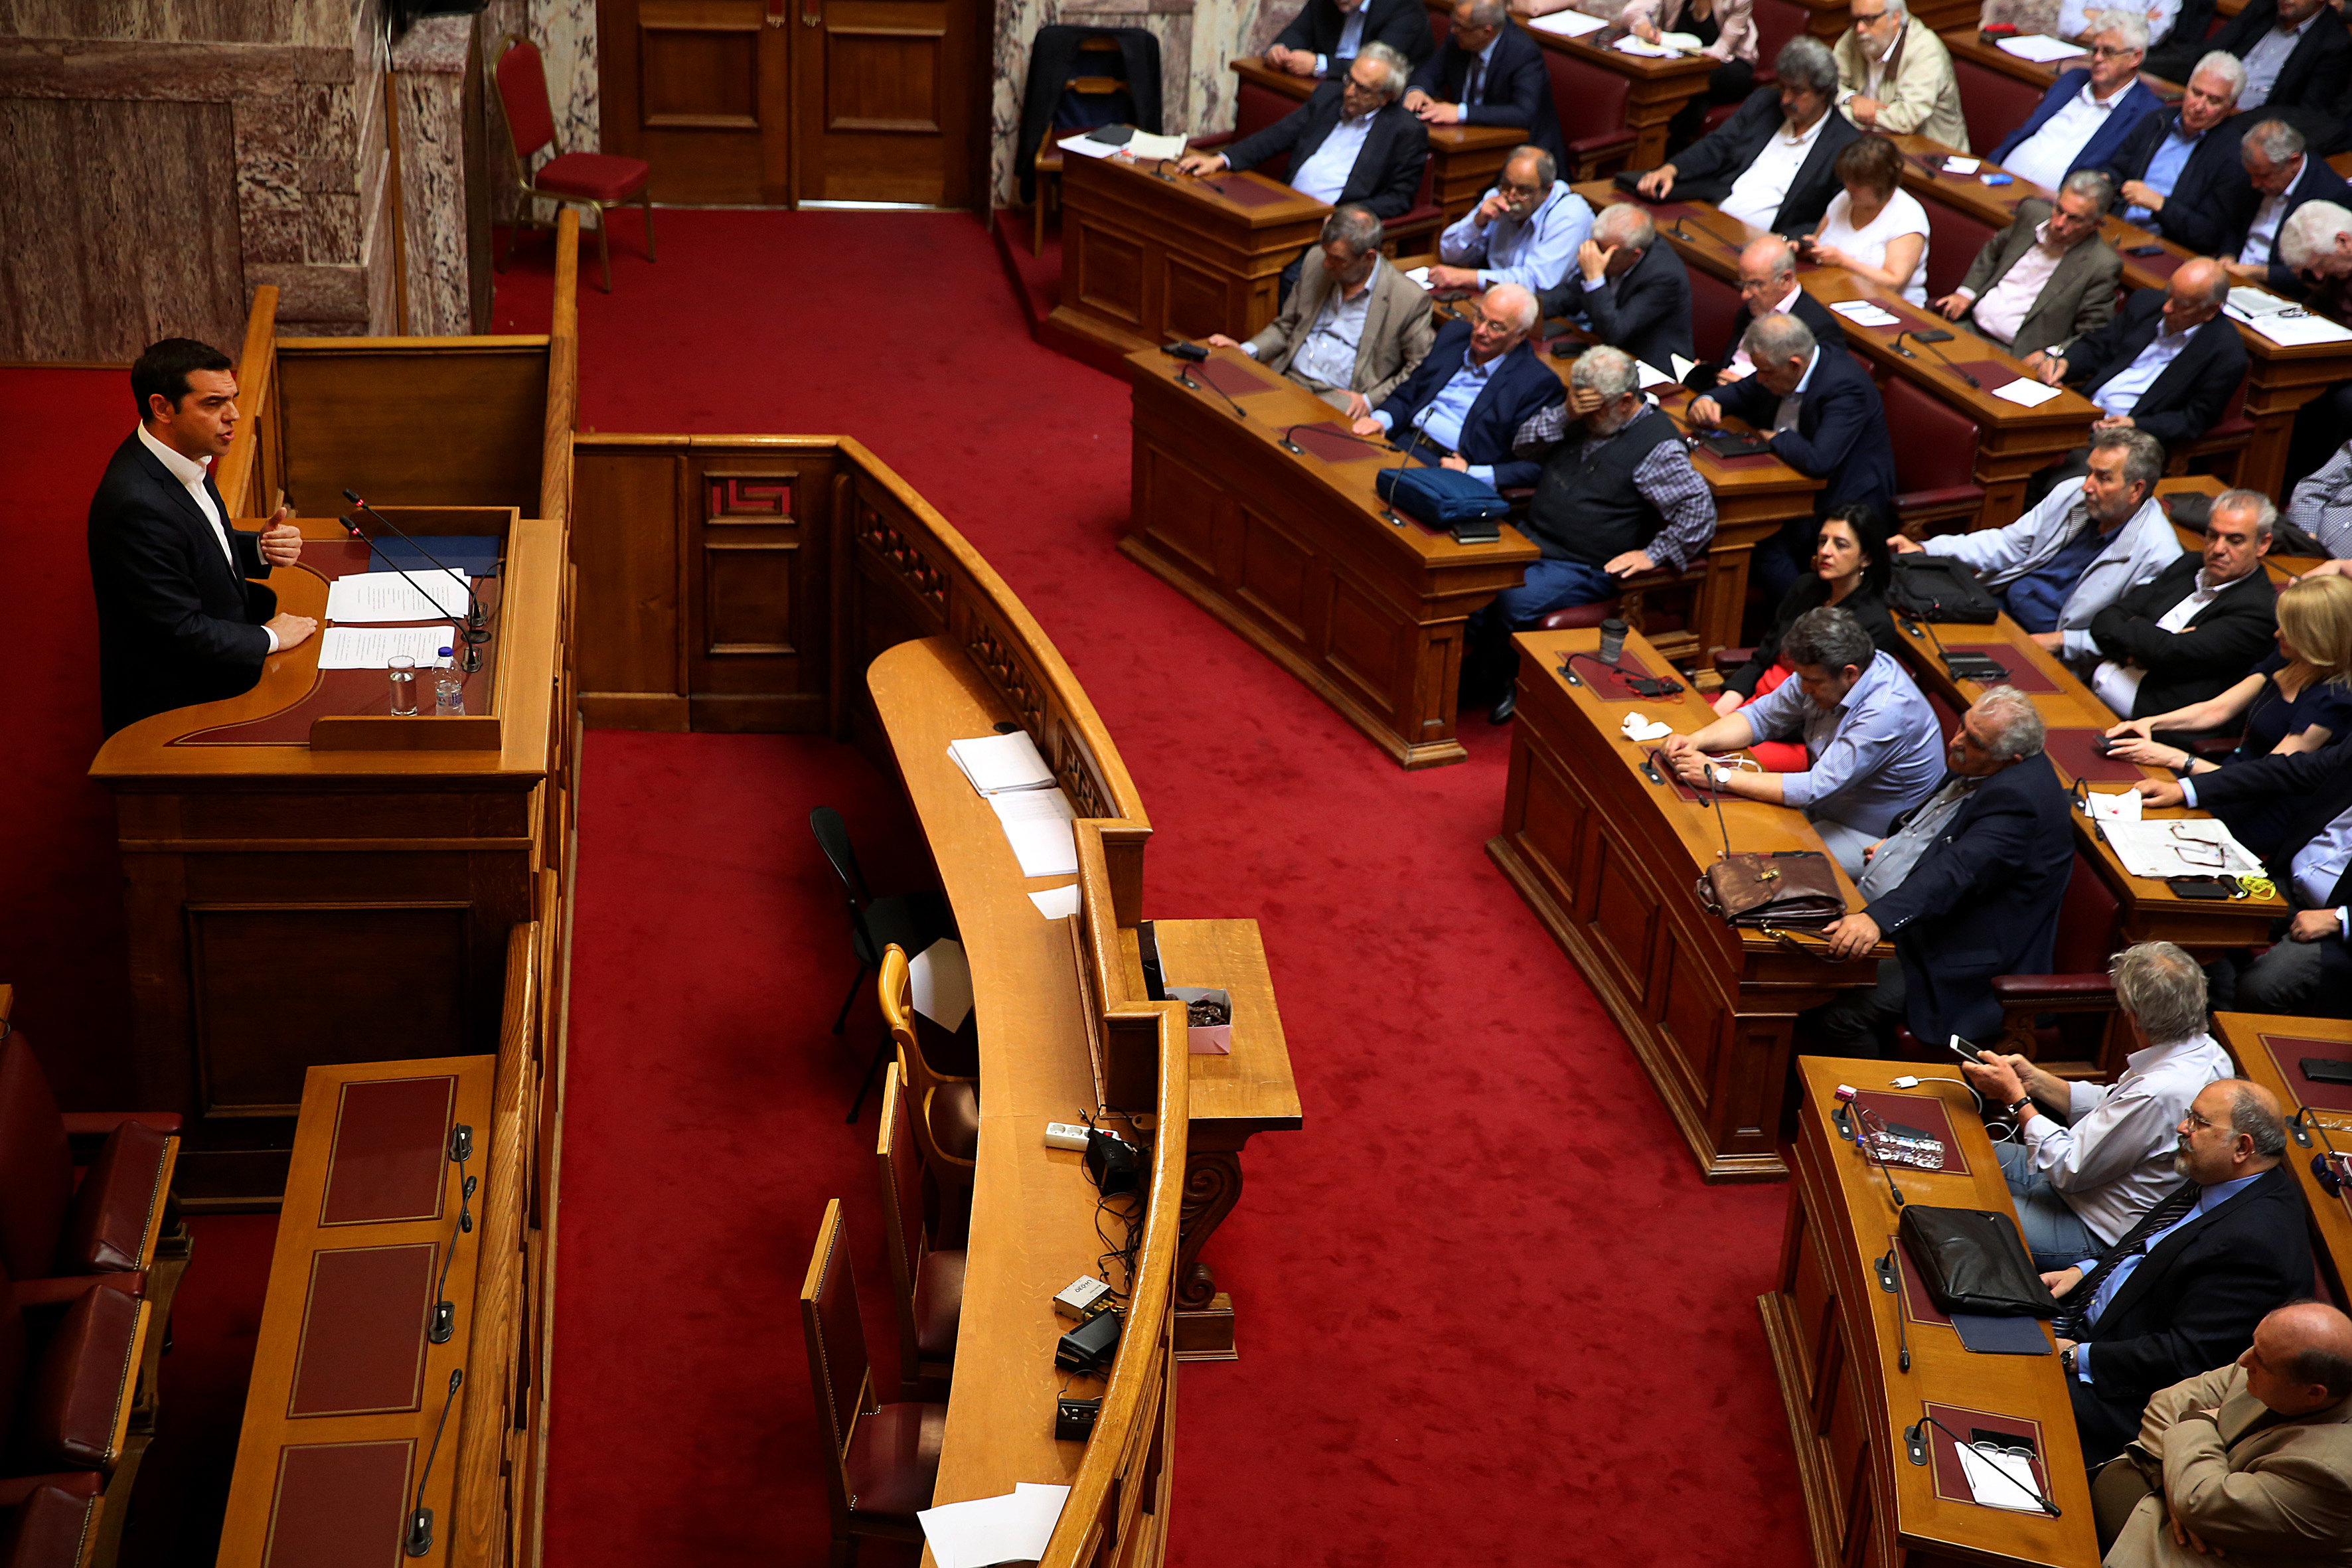 Tsipras heralds bailout exit as paramount goal in address to SYRIZA MPs